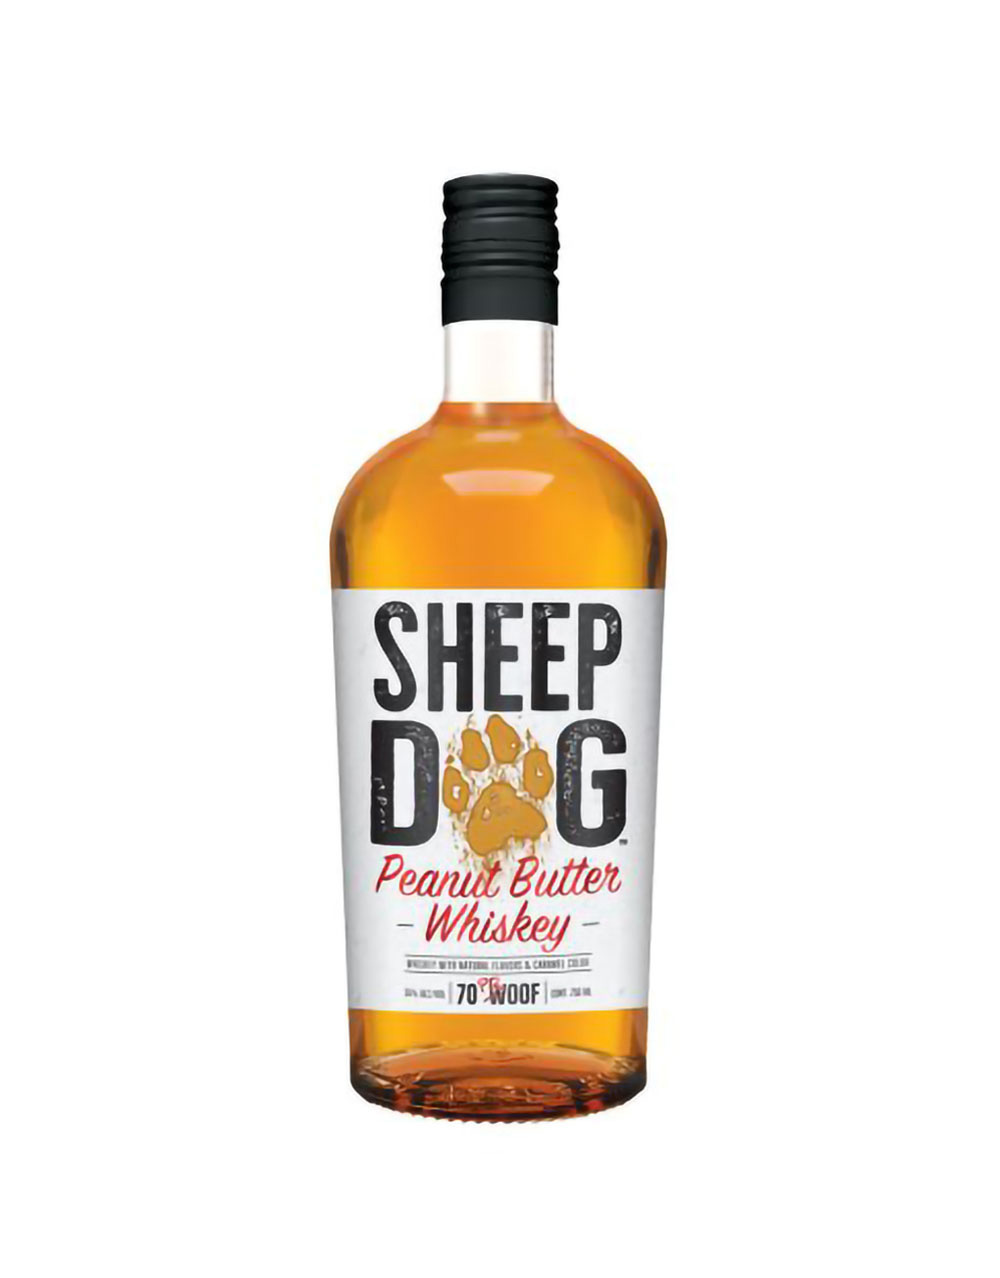 Sheep Dog Peanut Butter Flavored Whiskey